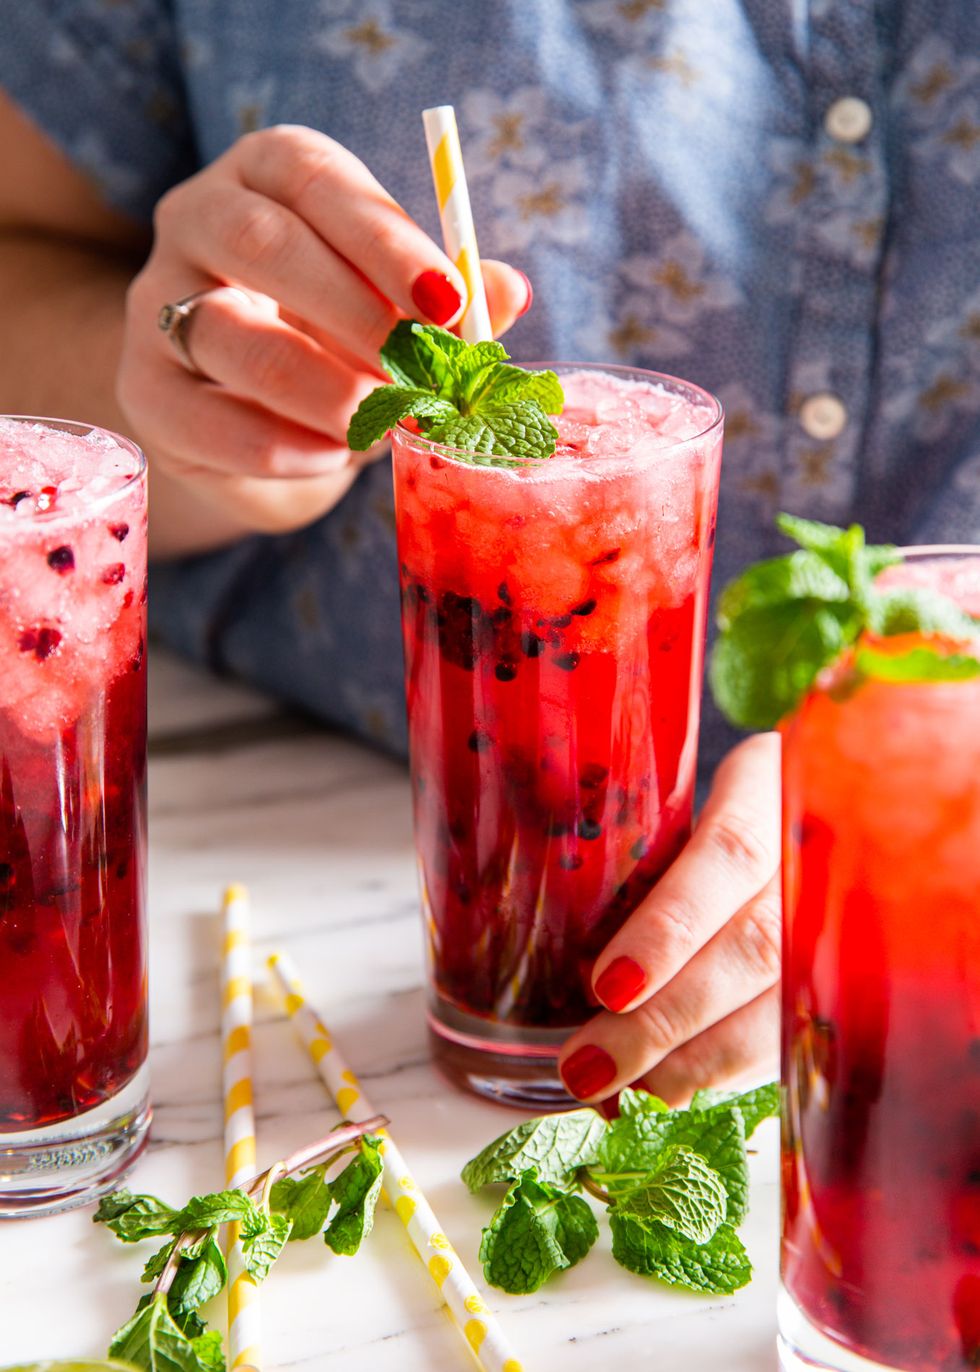 21 Best Non-Alcoholic Drinks for Summer Sipping